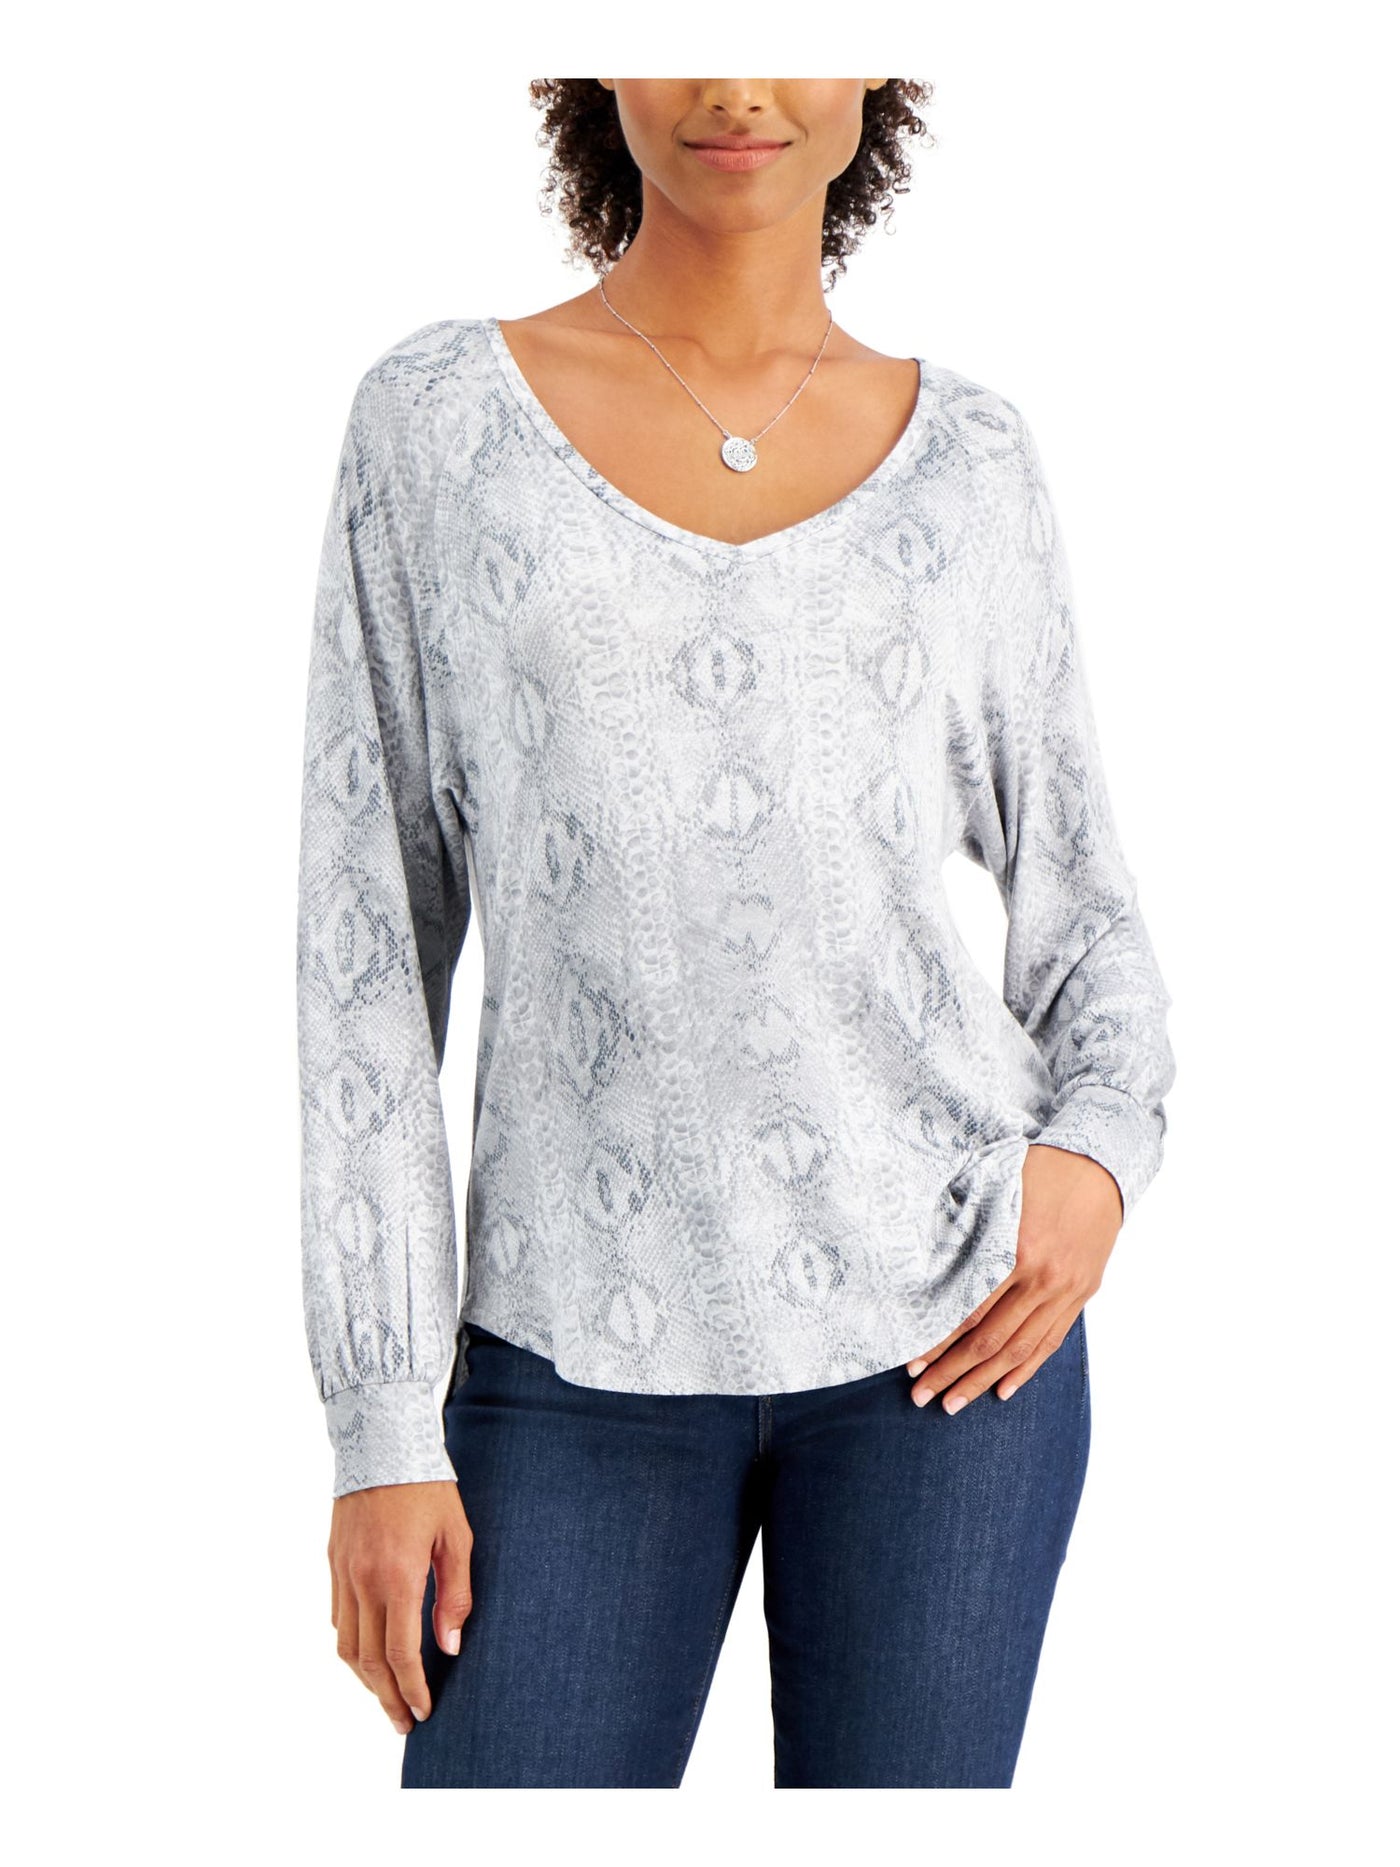 WILLOW DRIVE Womens Long Sleeve Scoop Neck Top